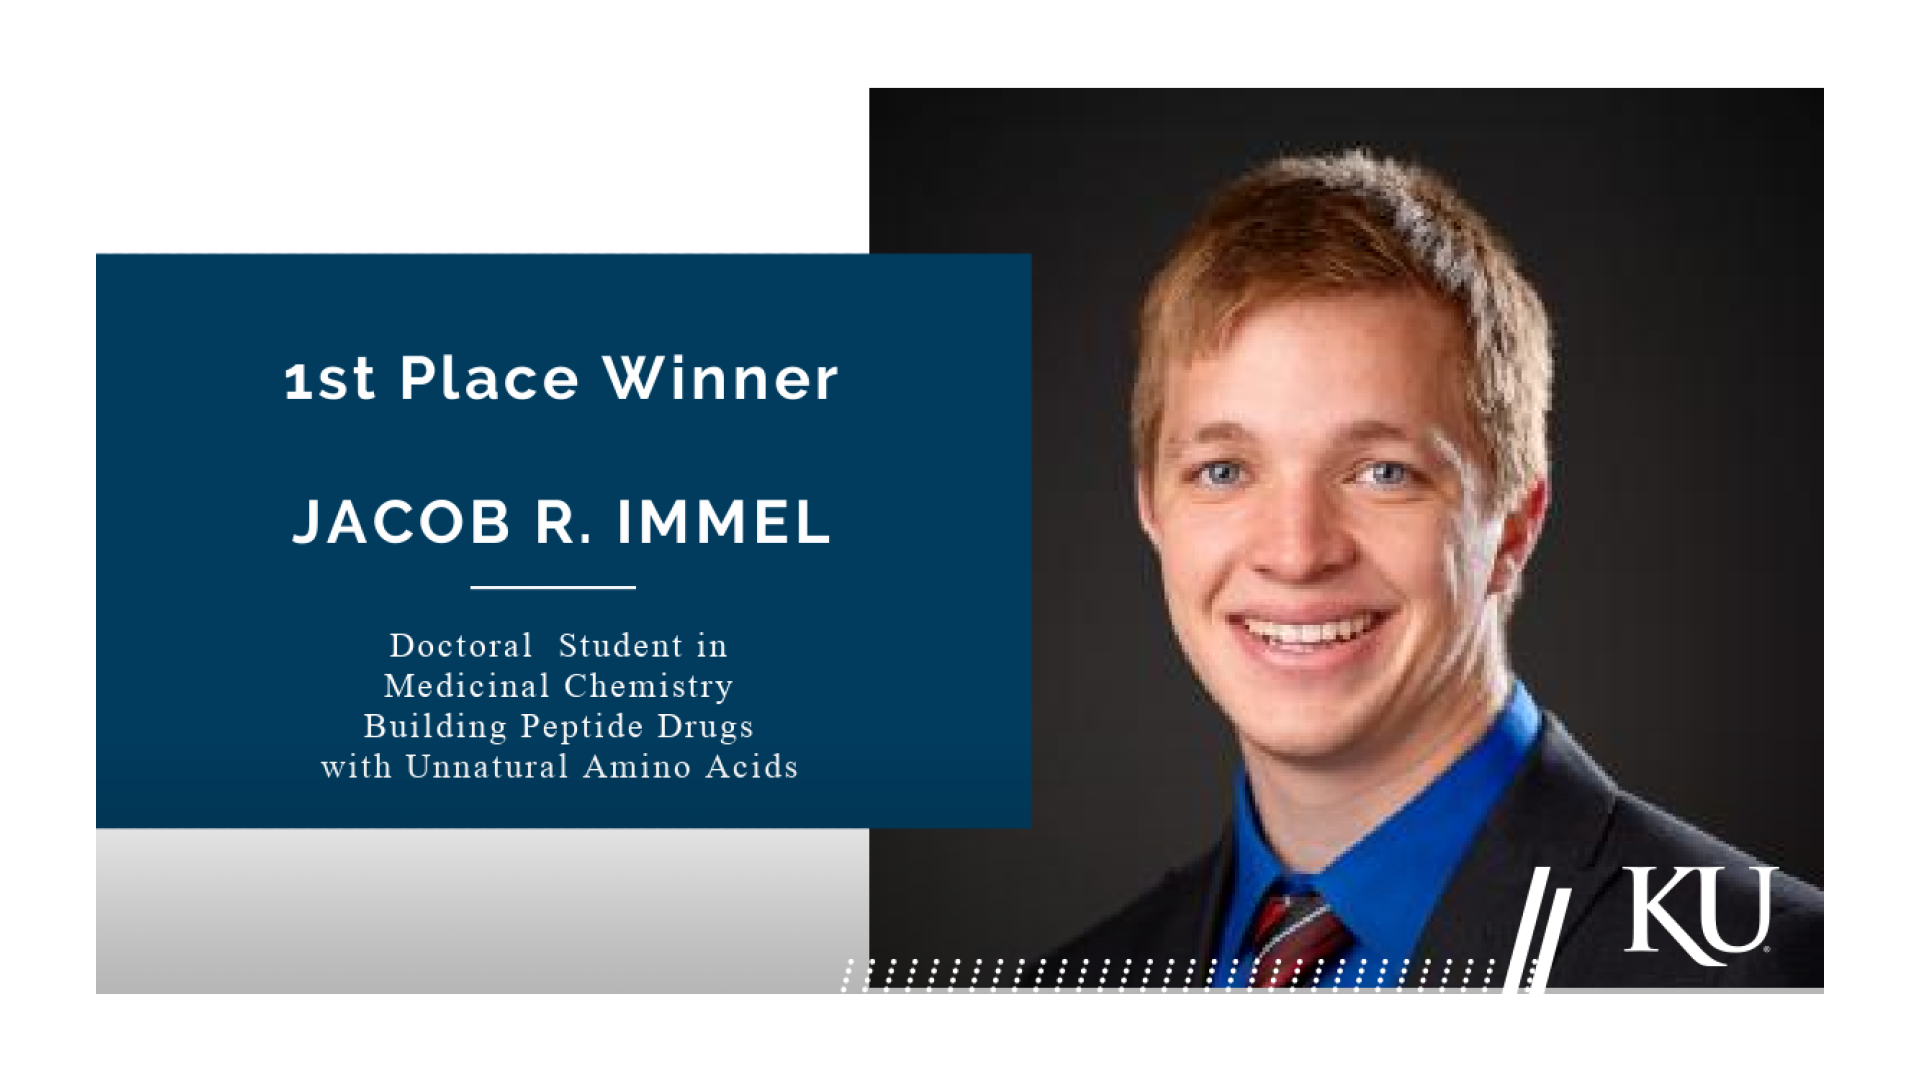 Image of Jacob R. Immel with a text box that indicates he is the first place winner